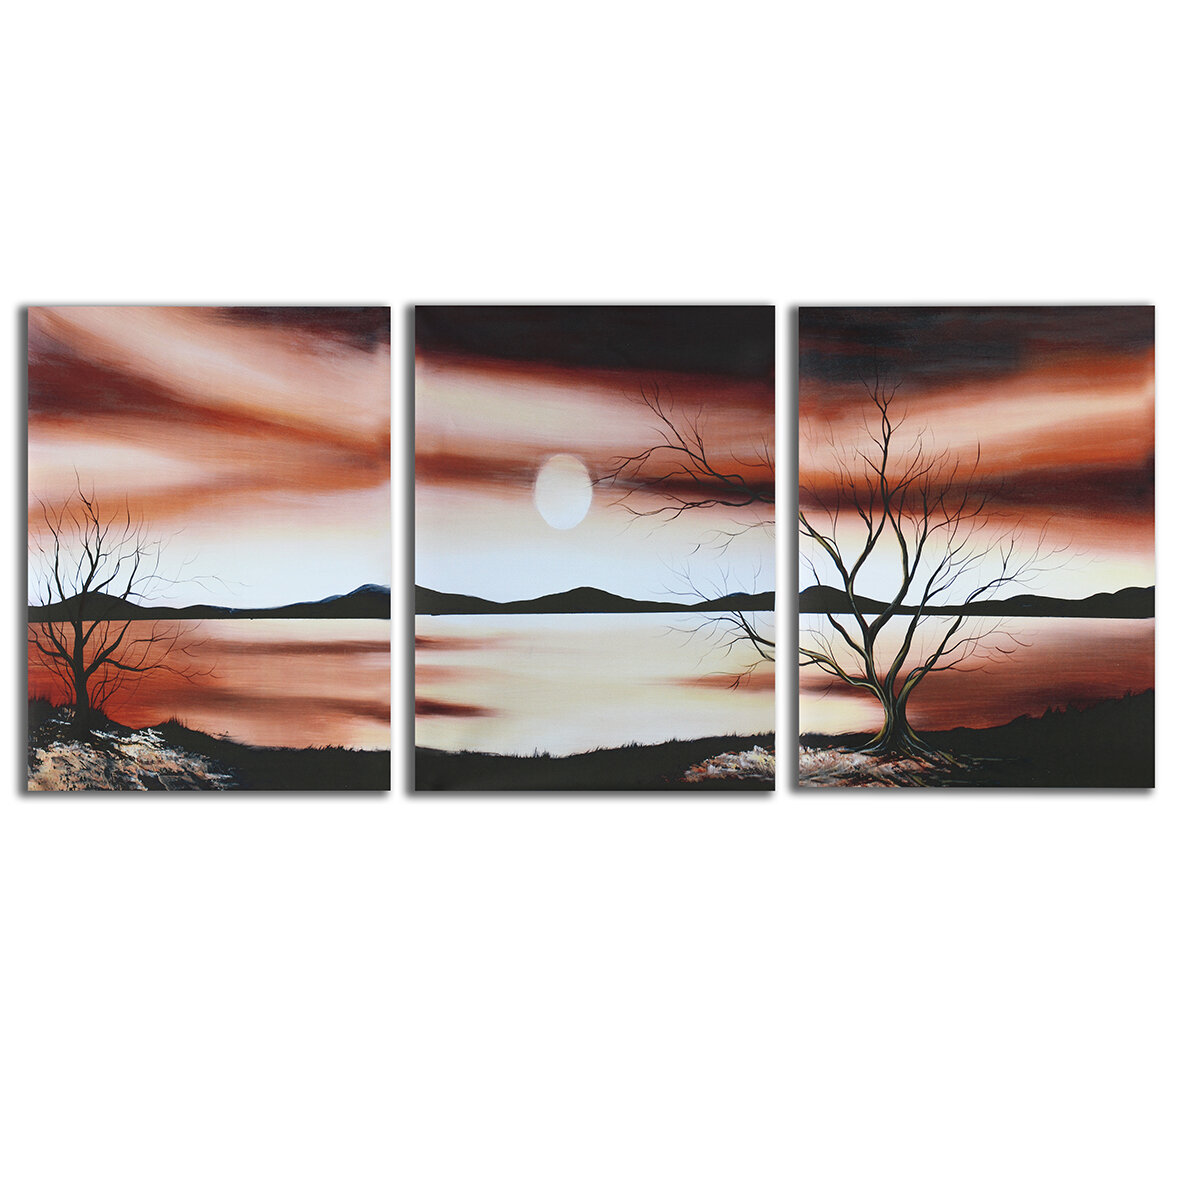 

3 Pcs Wall Decorative Painting Desert Sunset Canvas Print Art Pictures Frameless Wall Hanging Decorations for Home Offic